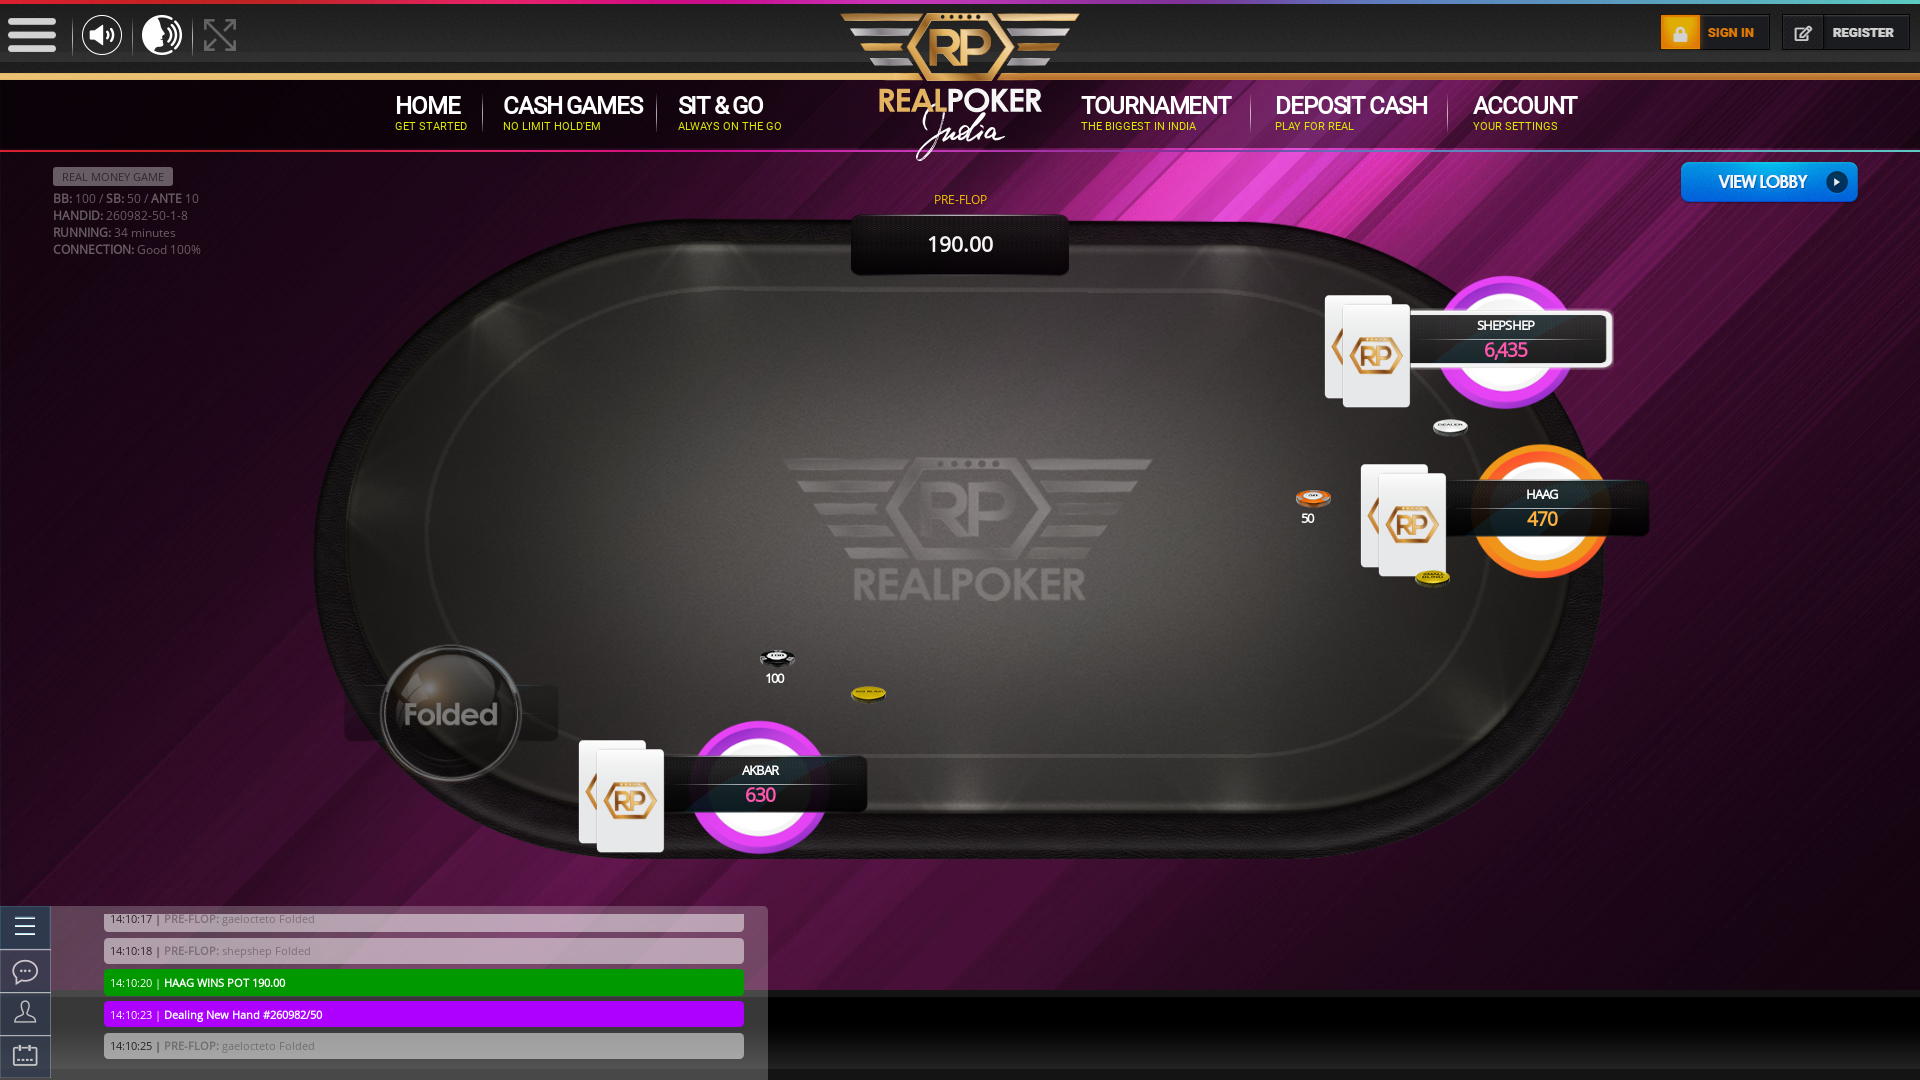 Real poker 10 player table in the 34th minute